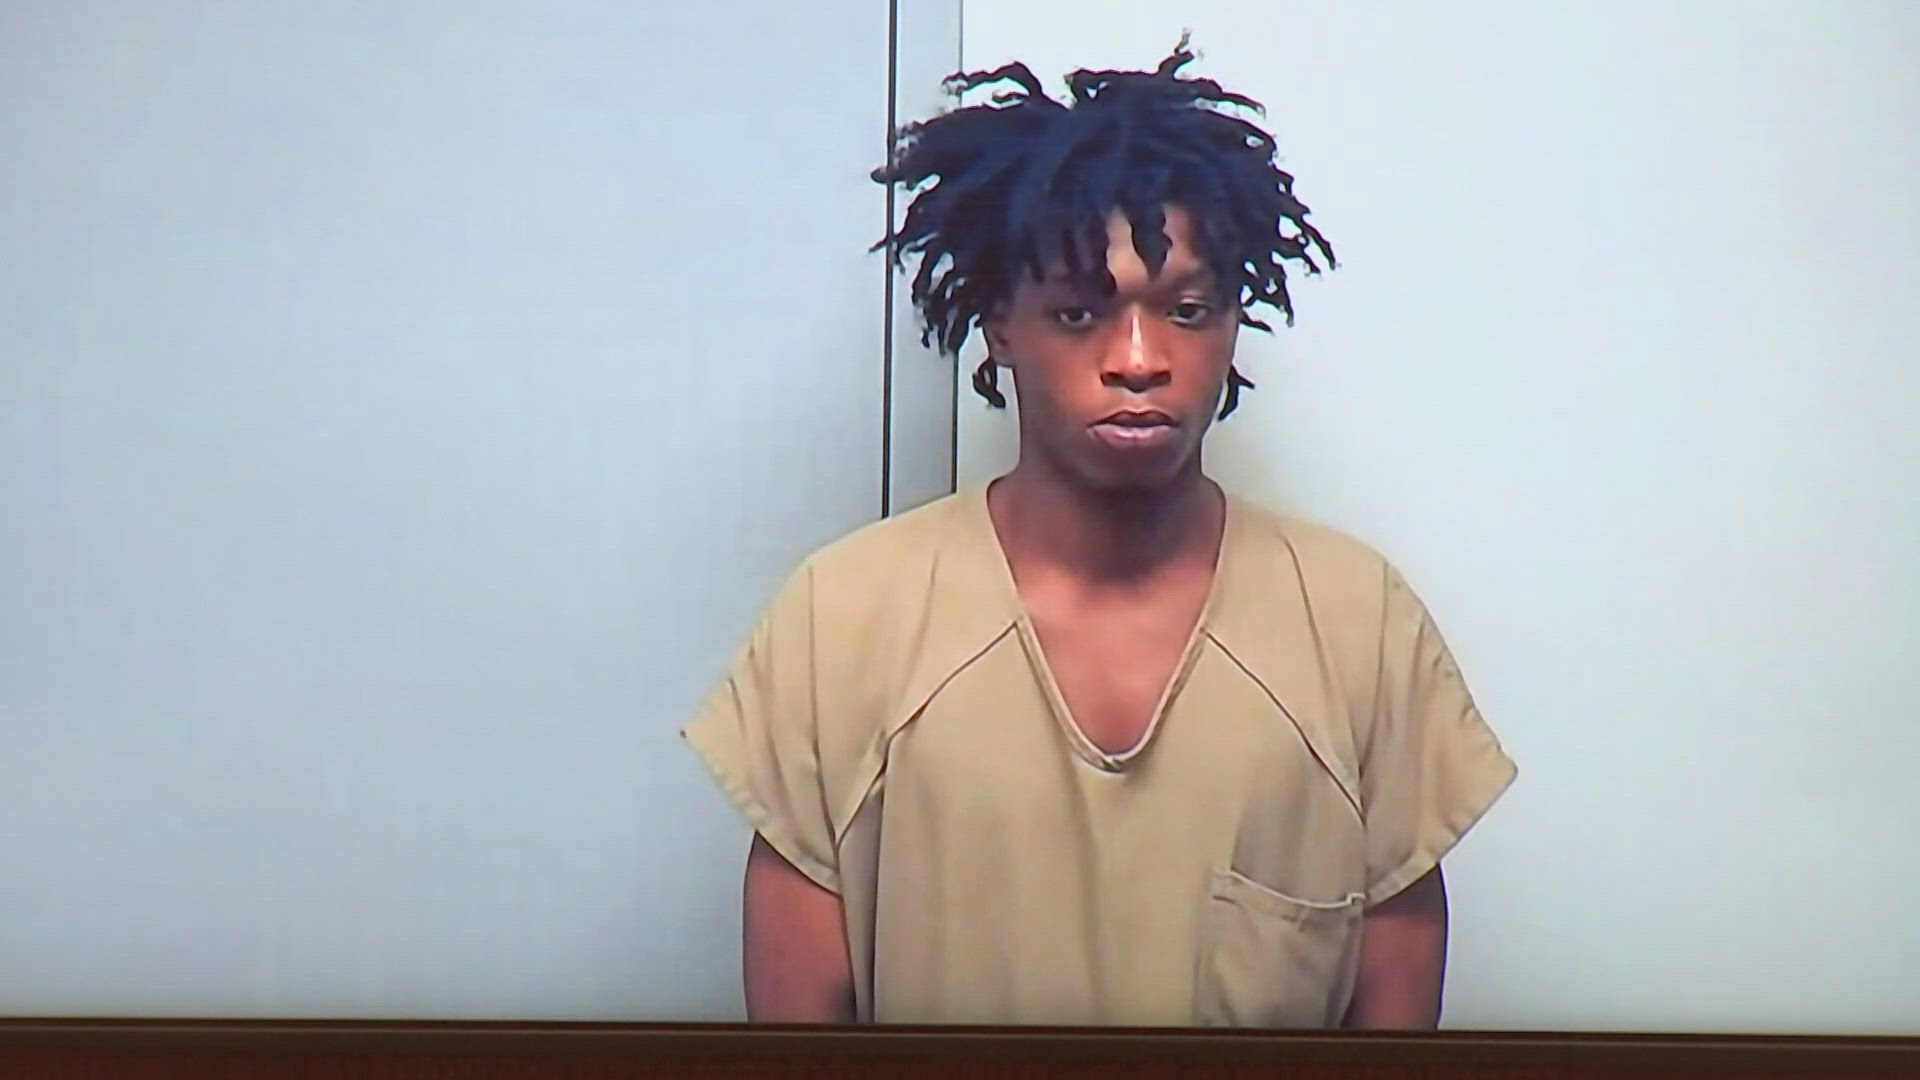 Lawuan Williams, 19, is charged with murder in the shooting death of 20-year-old Najaa Ellman.